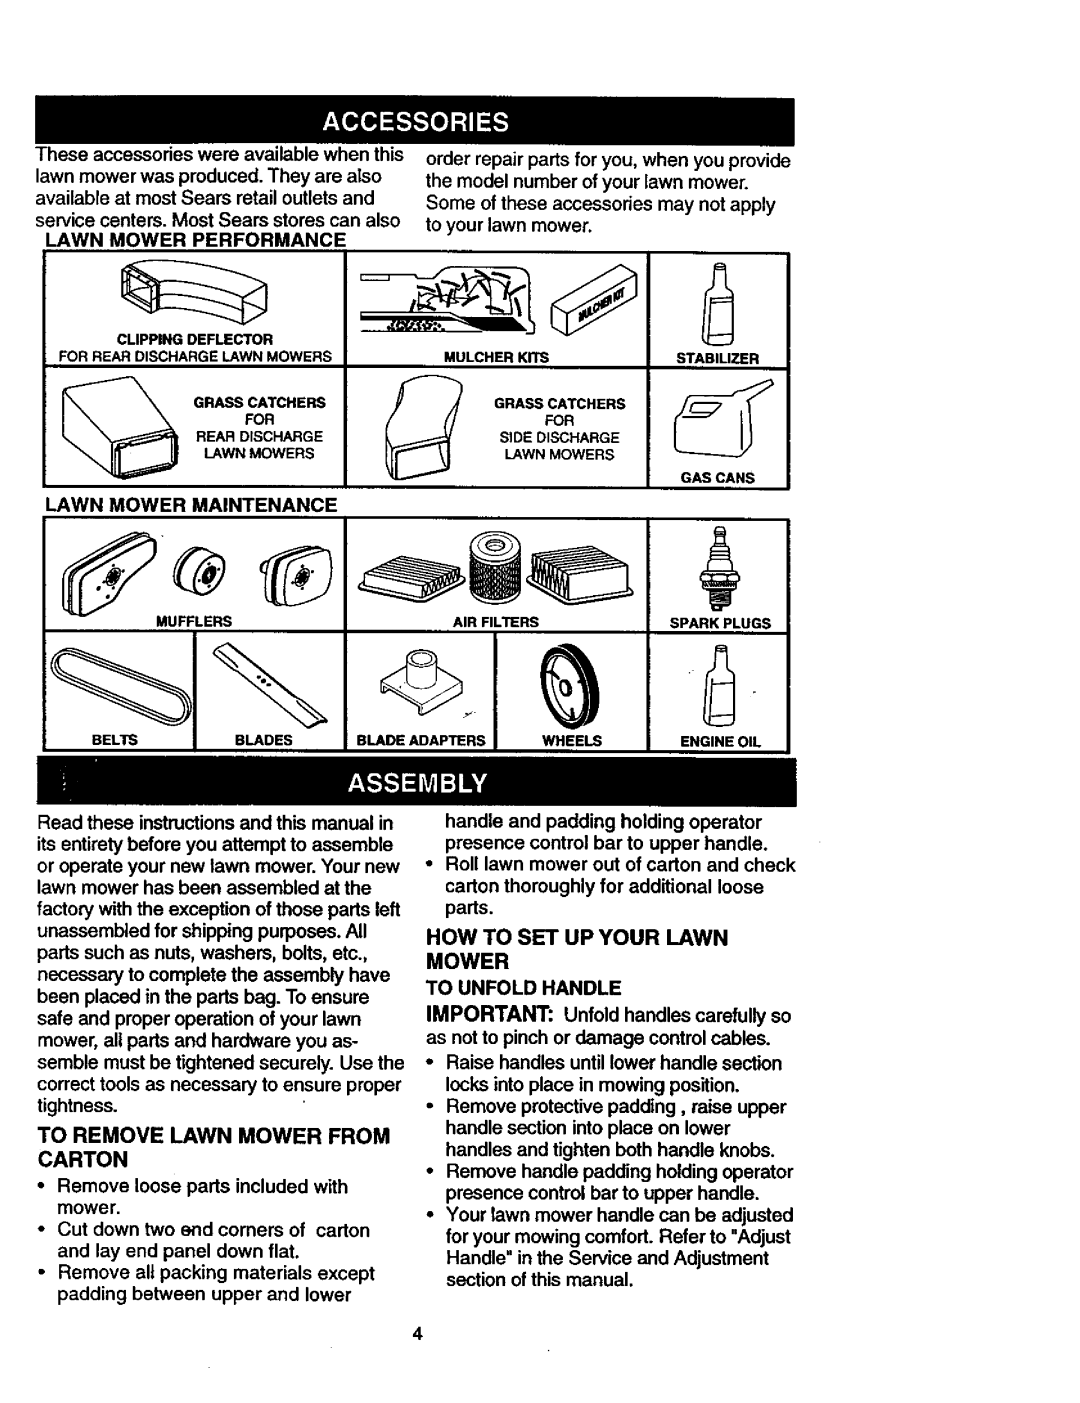 Craftsman 917.387402 owner manual CUF.OOEFL,C,O.tr, How To Set Up Your Lawn Mower 